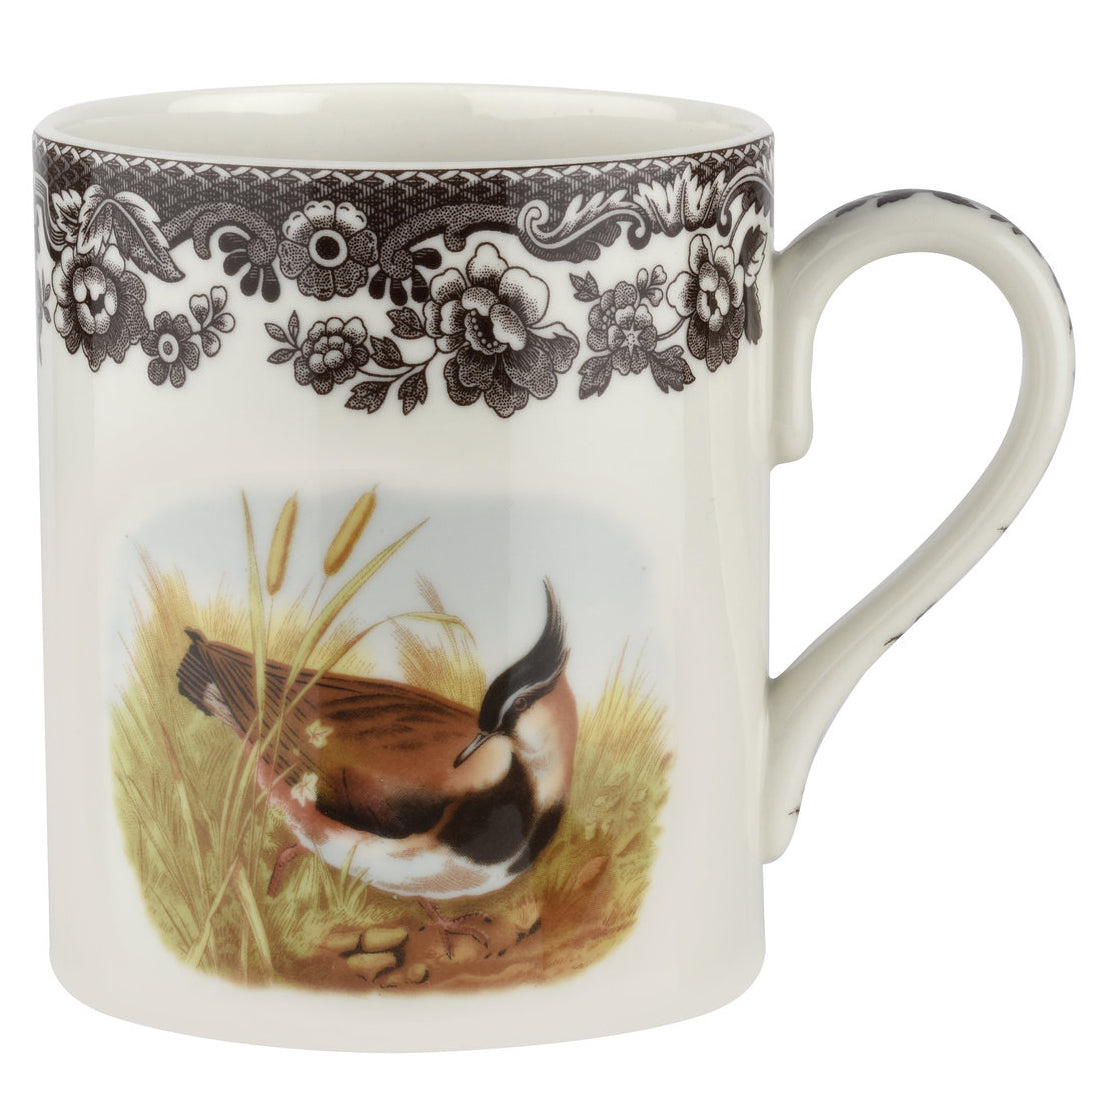 Spode Woodland Large Mug-16 oz.-HOME/GIFTWARE-Lapwing-Kevin's Fine Outdoor Gear & Apparel